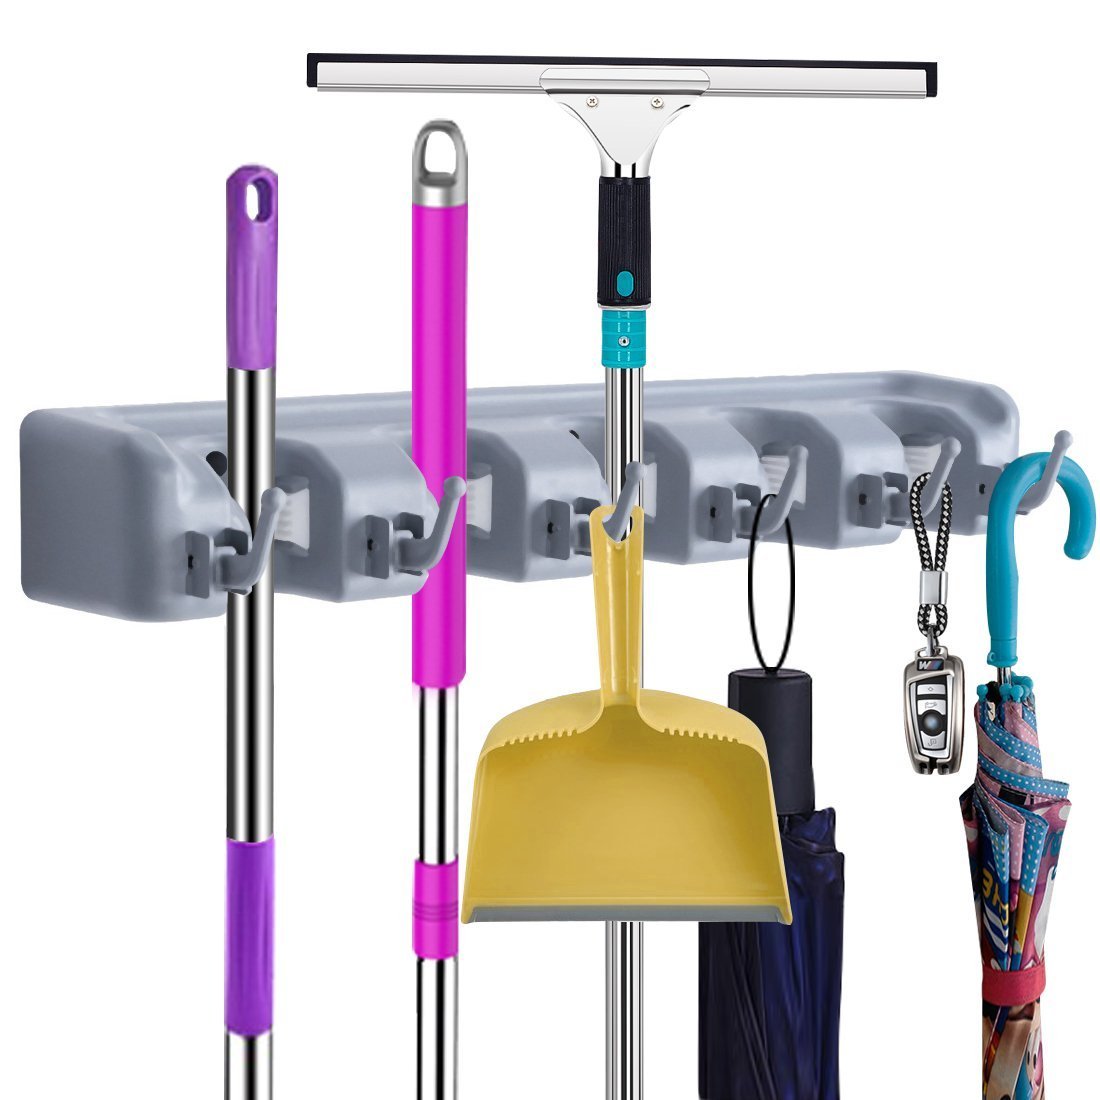 Get mop broom holder wall mounted garden tool organizer space saving storage rack hanger with 5 position with 6 hooks strong grip holds up to 11 tools for kitchen garden and garage